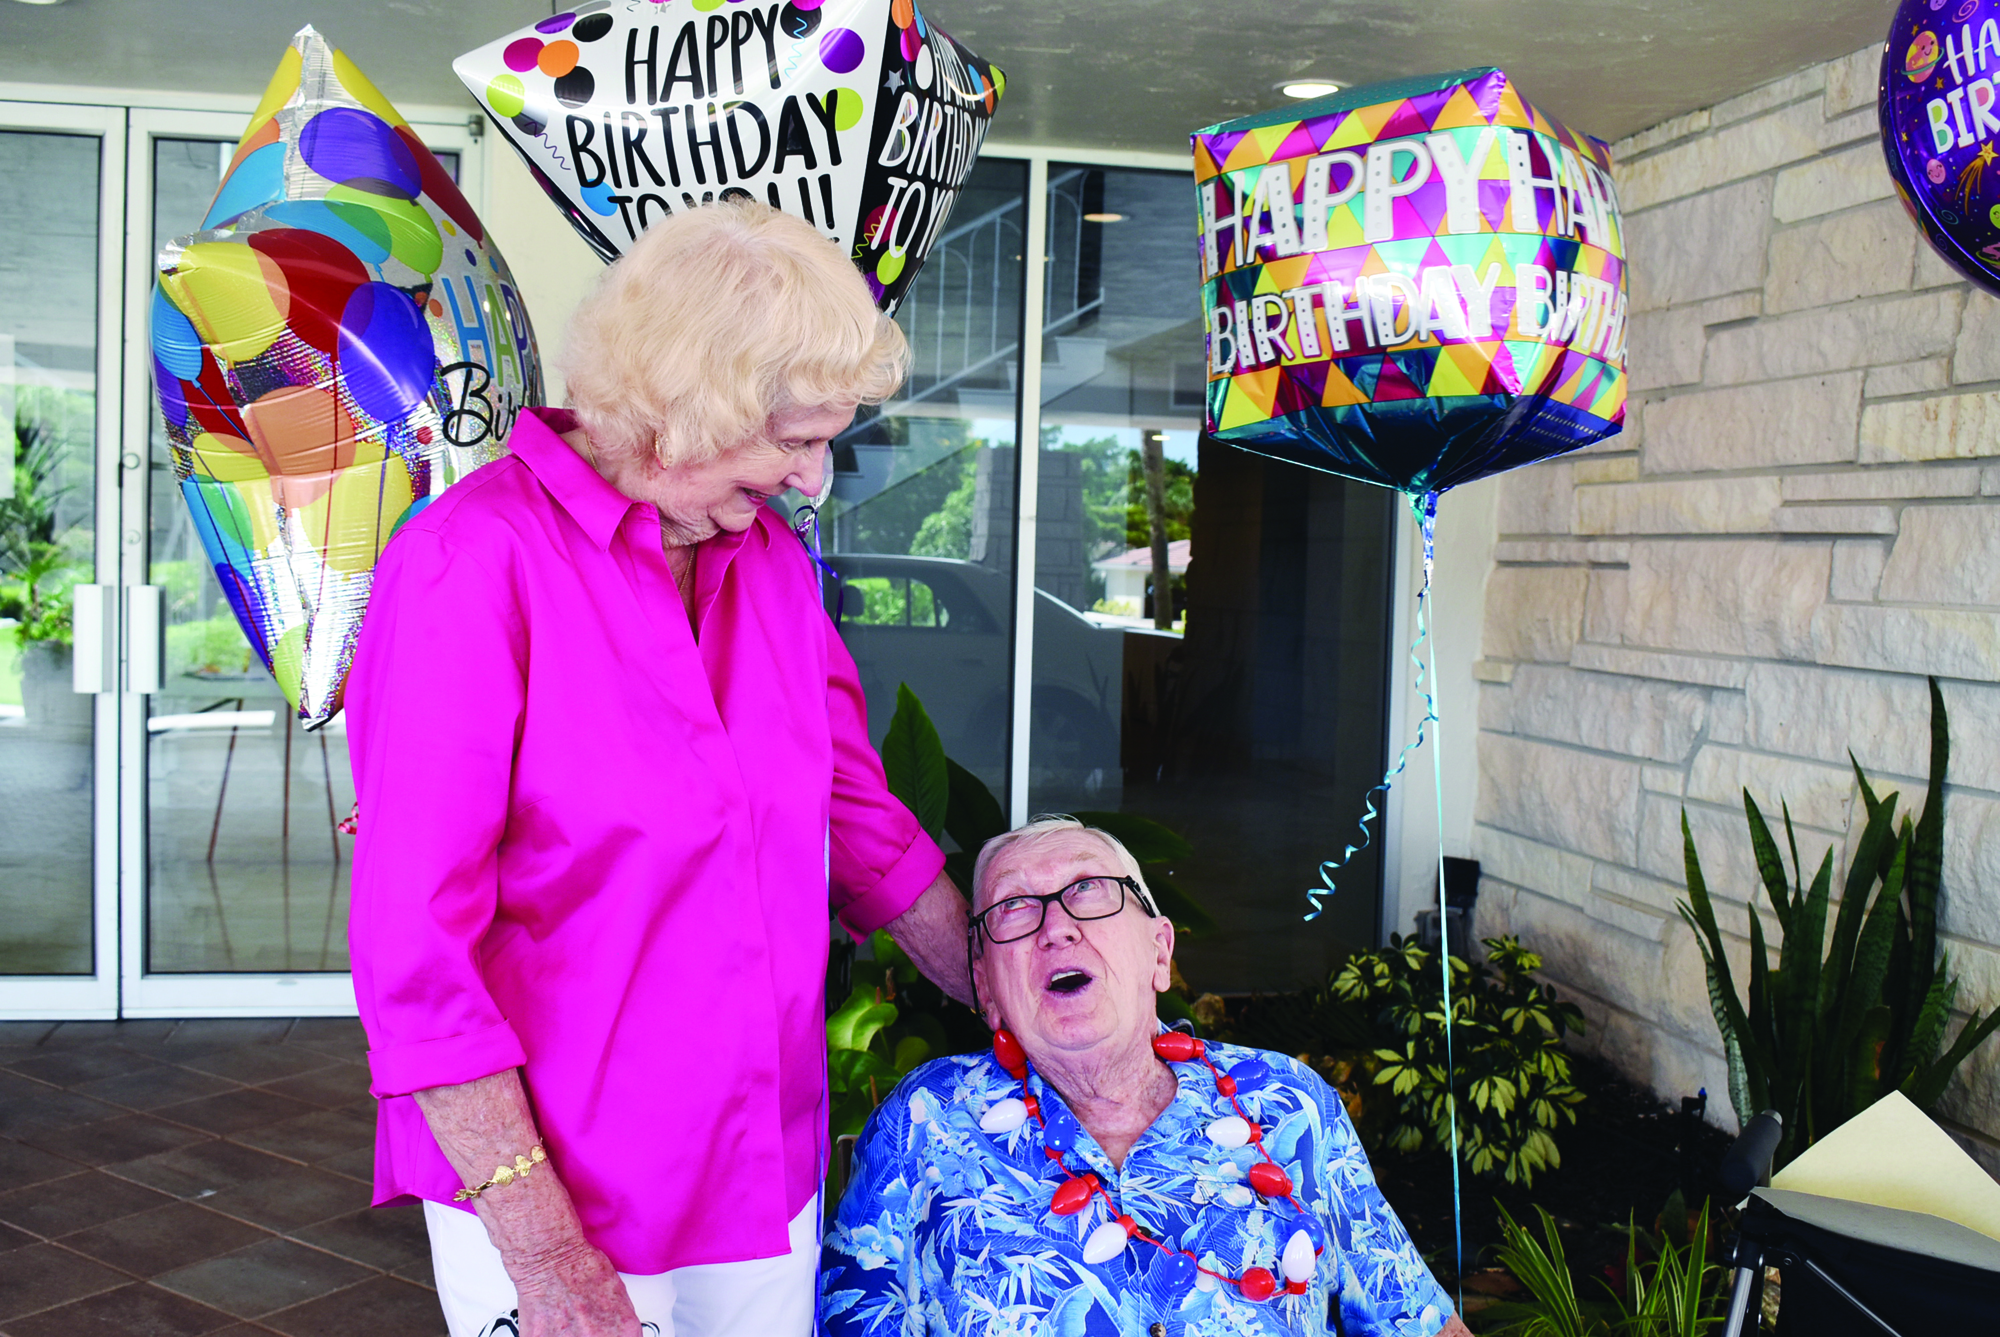 Aug. 13: Jimmy Loftis' 95th birthday party was a surprise. More than 40 cars (and a fire truck) drove past and he received one birthday card for each of his 95 years.